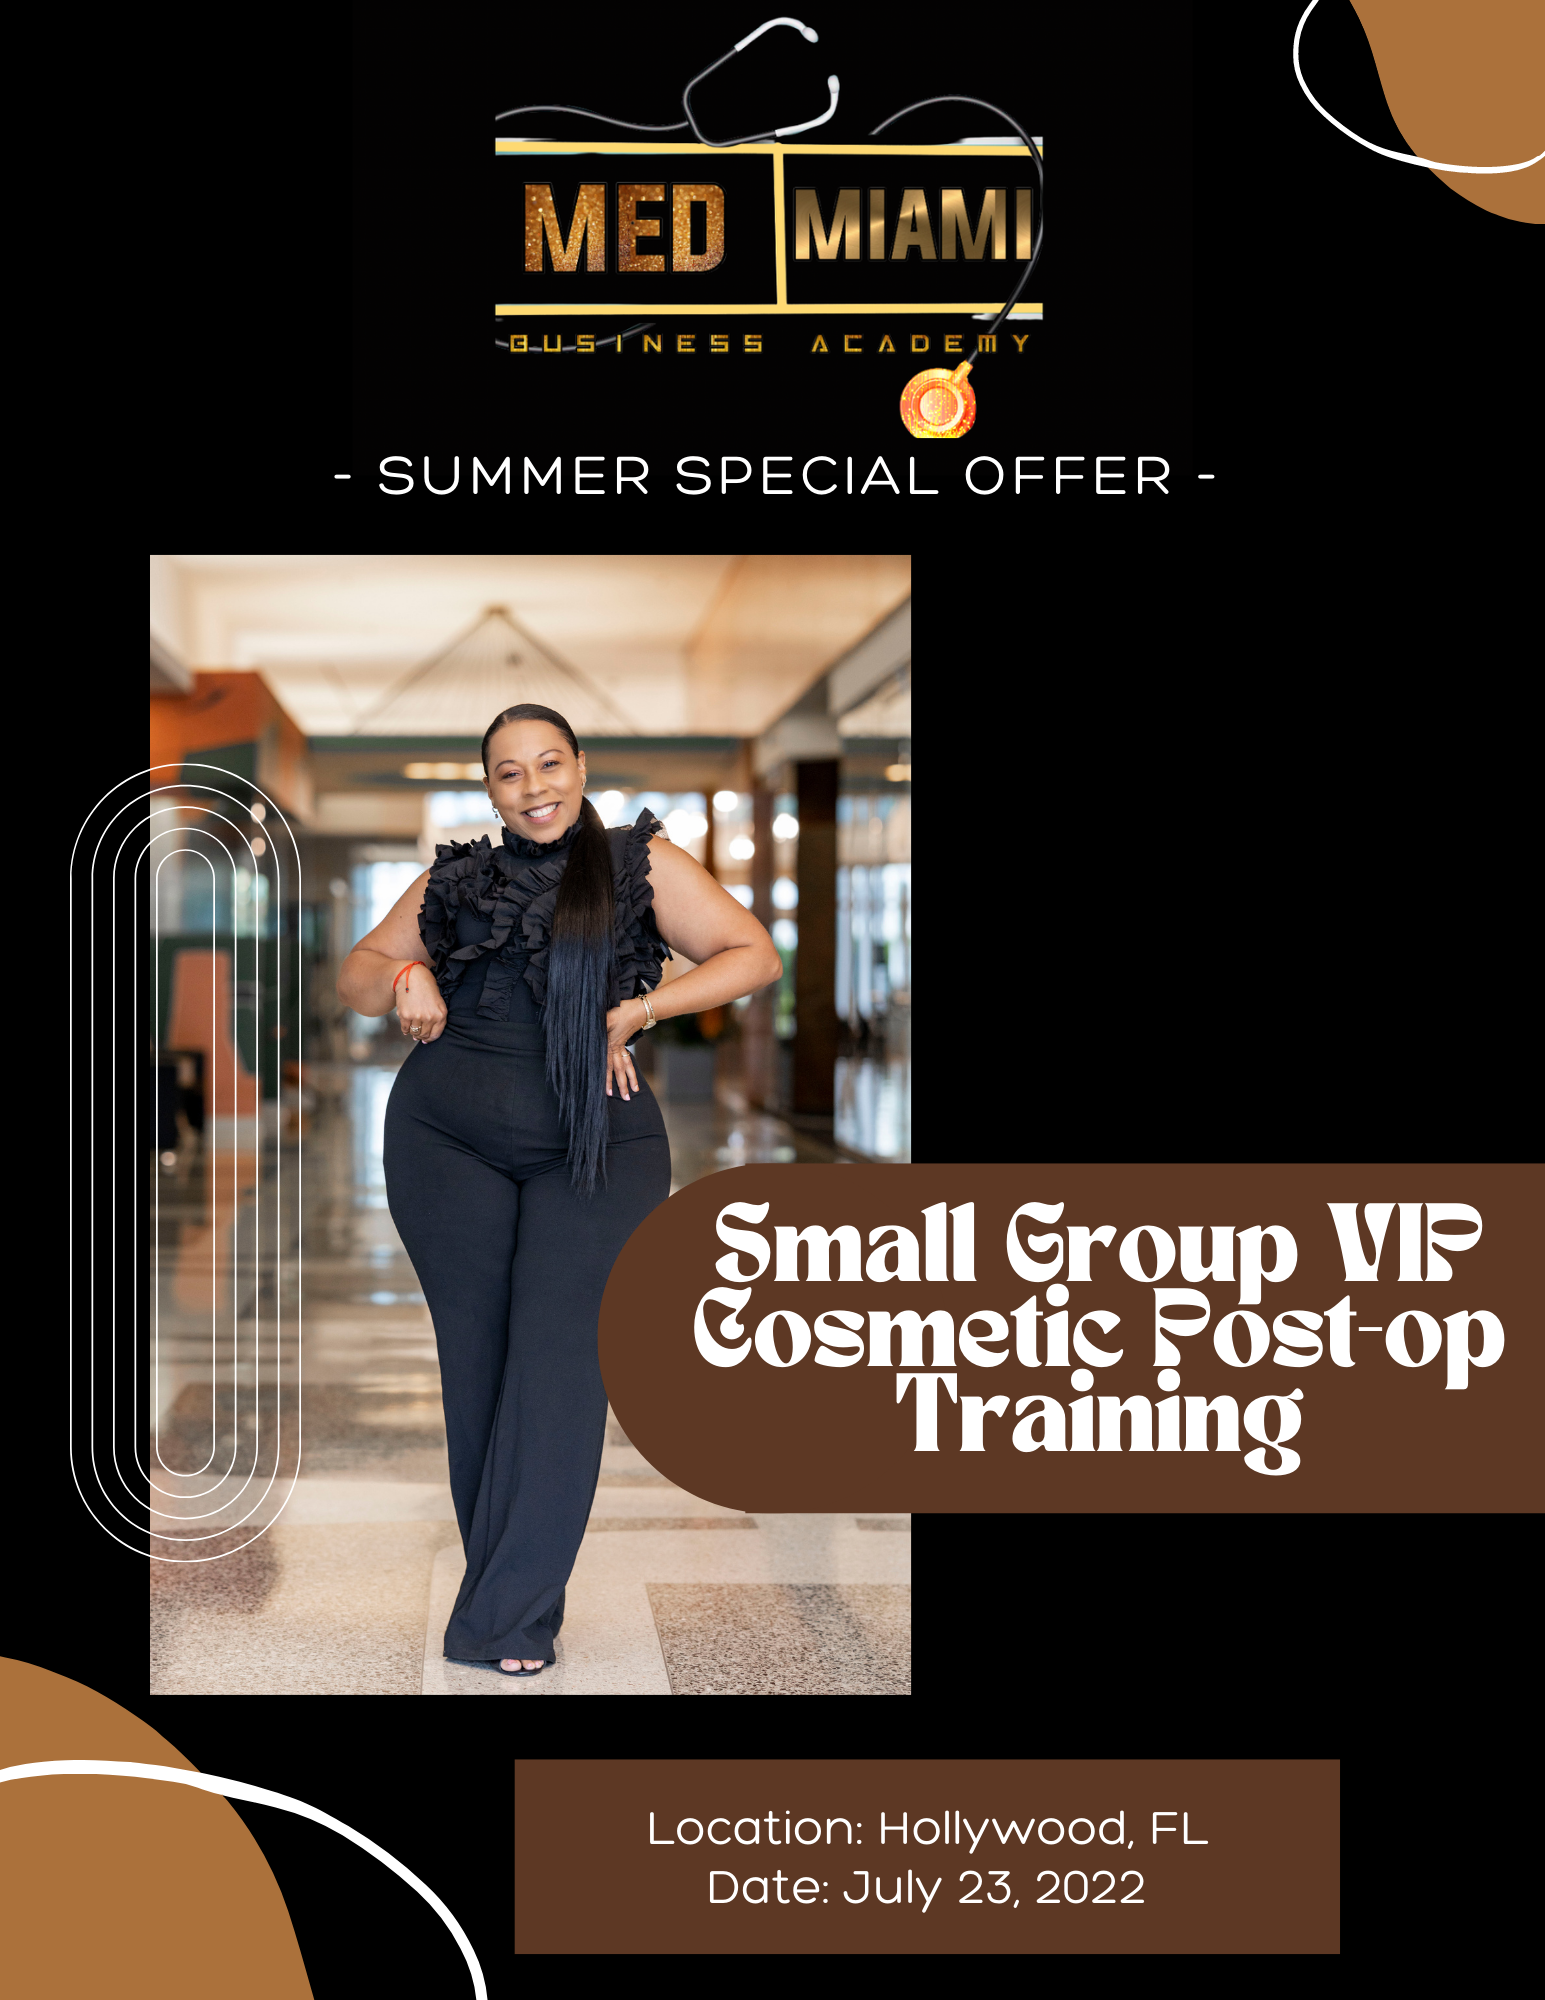 Small Group VIP Cosmetic Post-Op Training